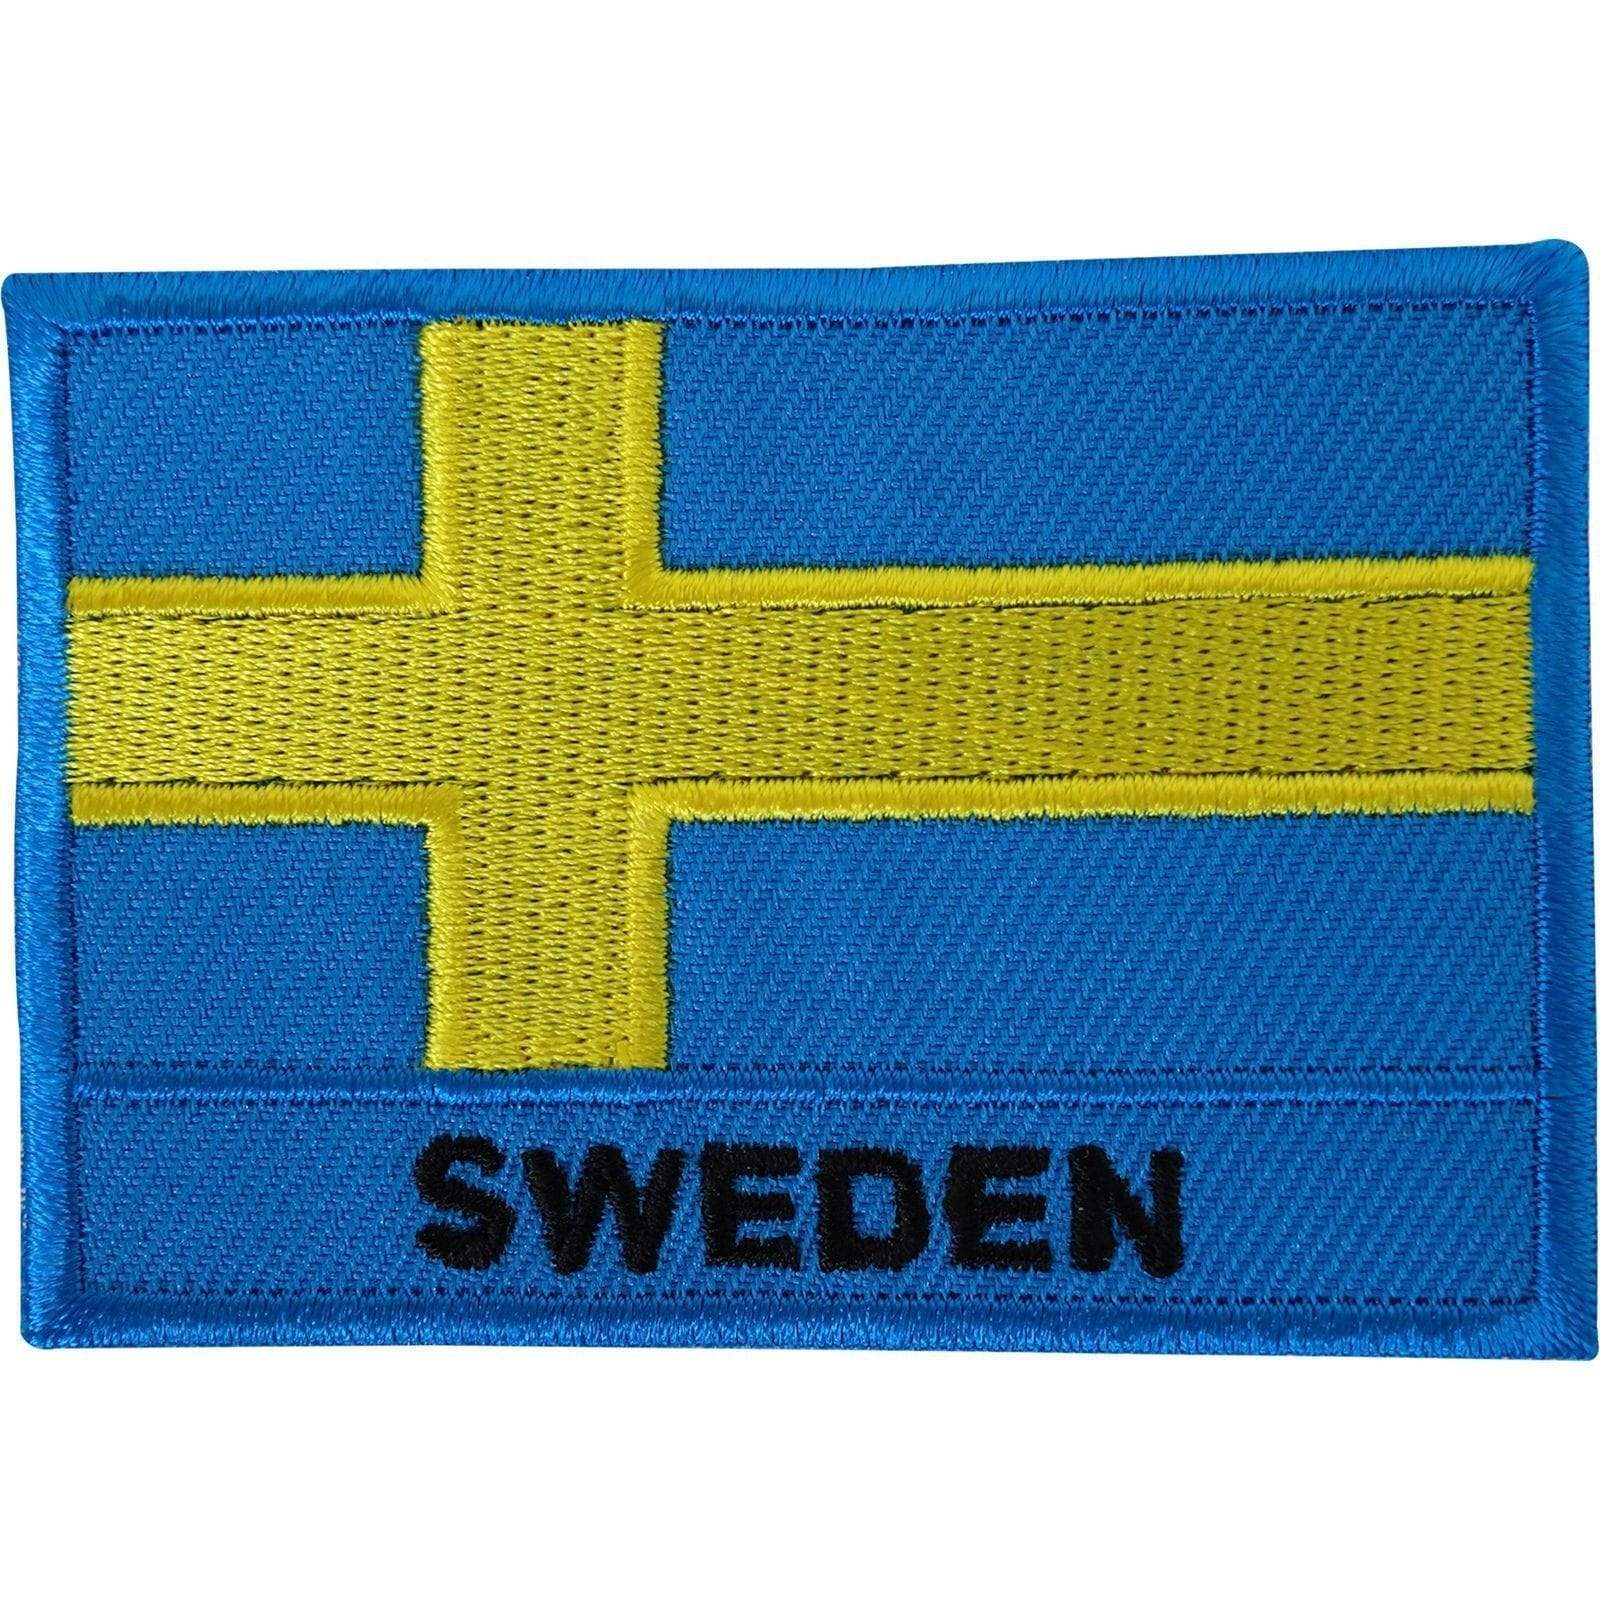 Sweden Flag Embroidered Iron Sew On Patch Swedish Shirt Jacket Embroidery Badge